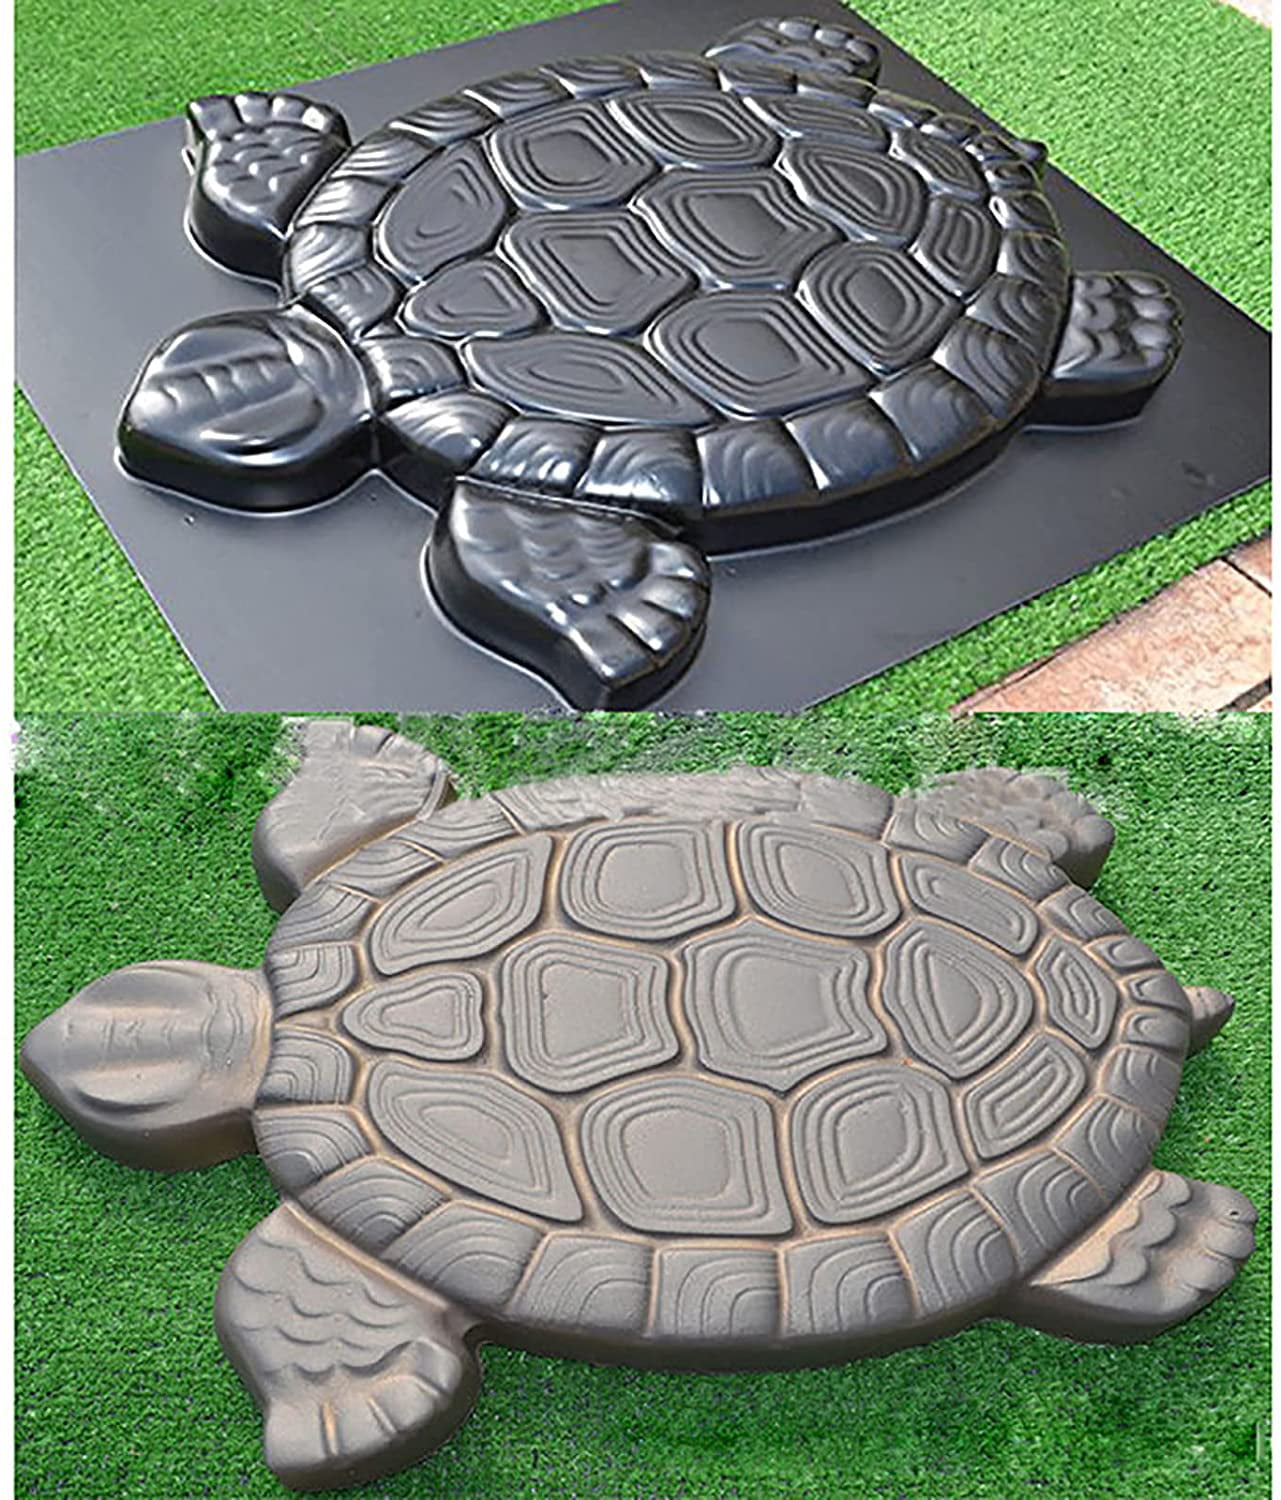 Concrete Mold Turtle Stepping Stone Cement Mould ABS Tortoise Garden Path S02 